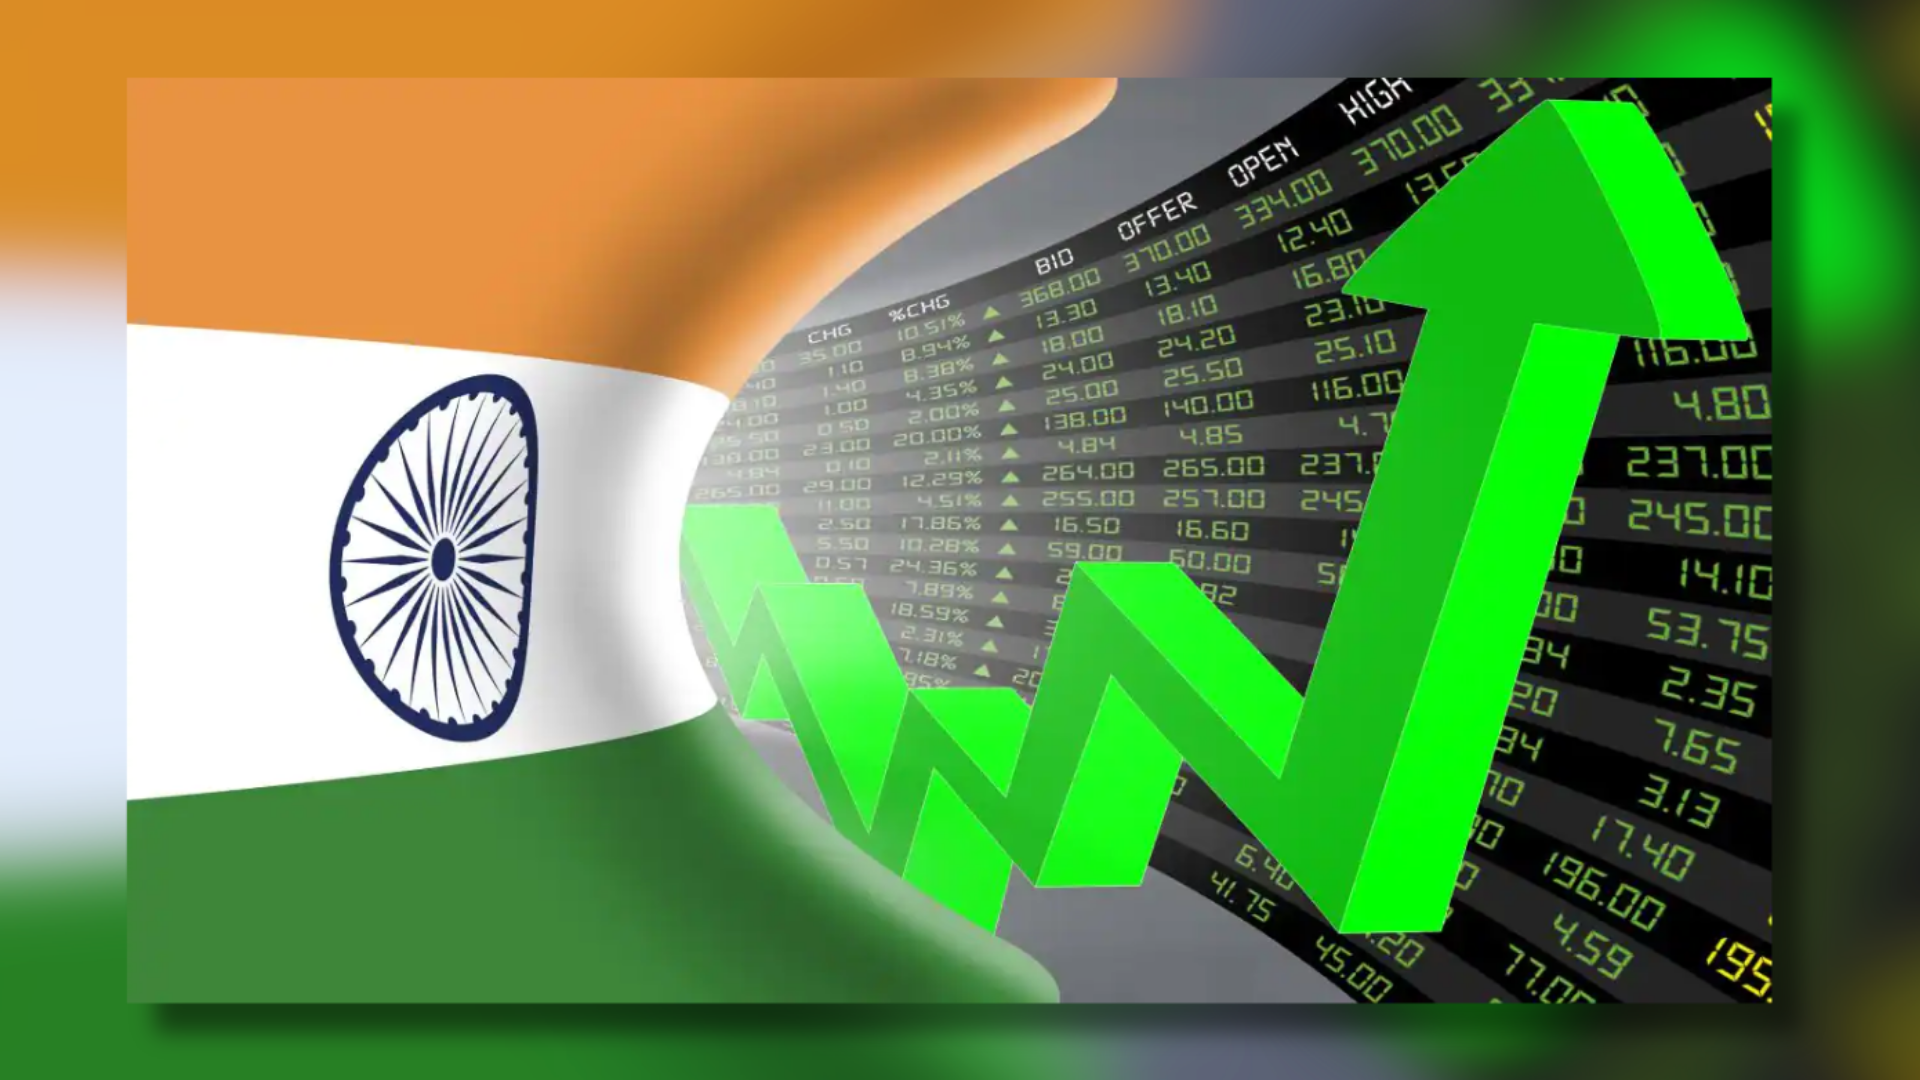 Nifty Next 50 Emerges As India’s Premier Stock Index For Earnings Potential